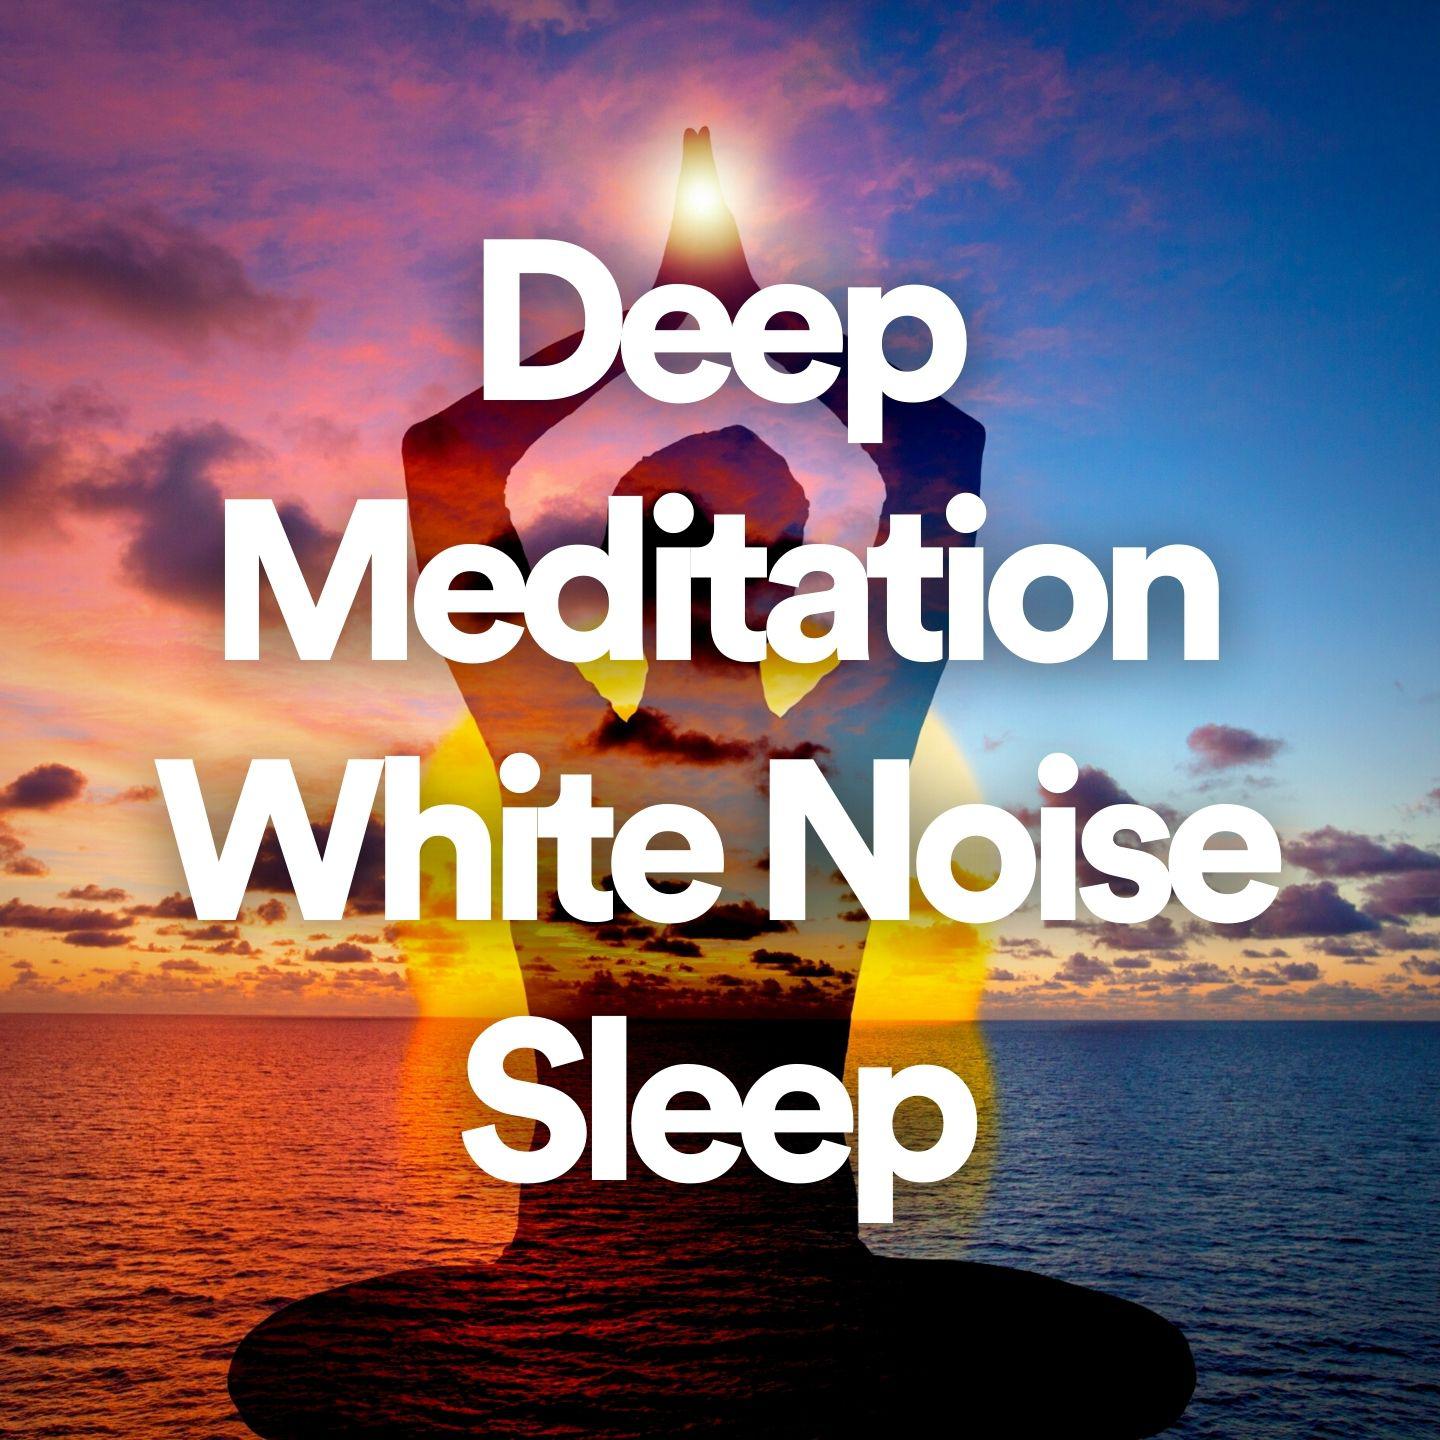 Zen Meditation and Natural White Noise and New Age Deep Massage - Experience Life